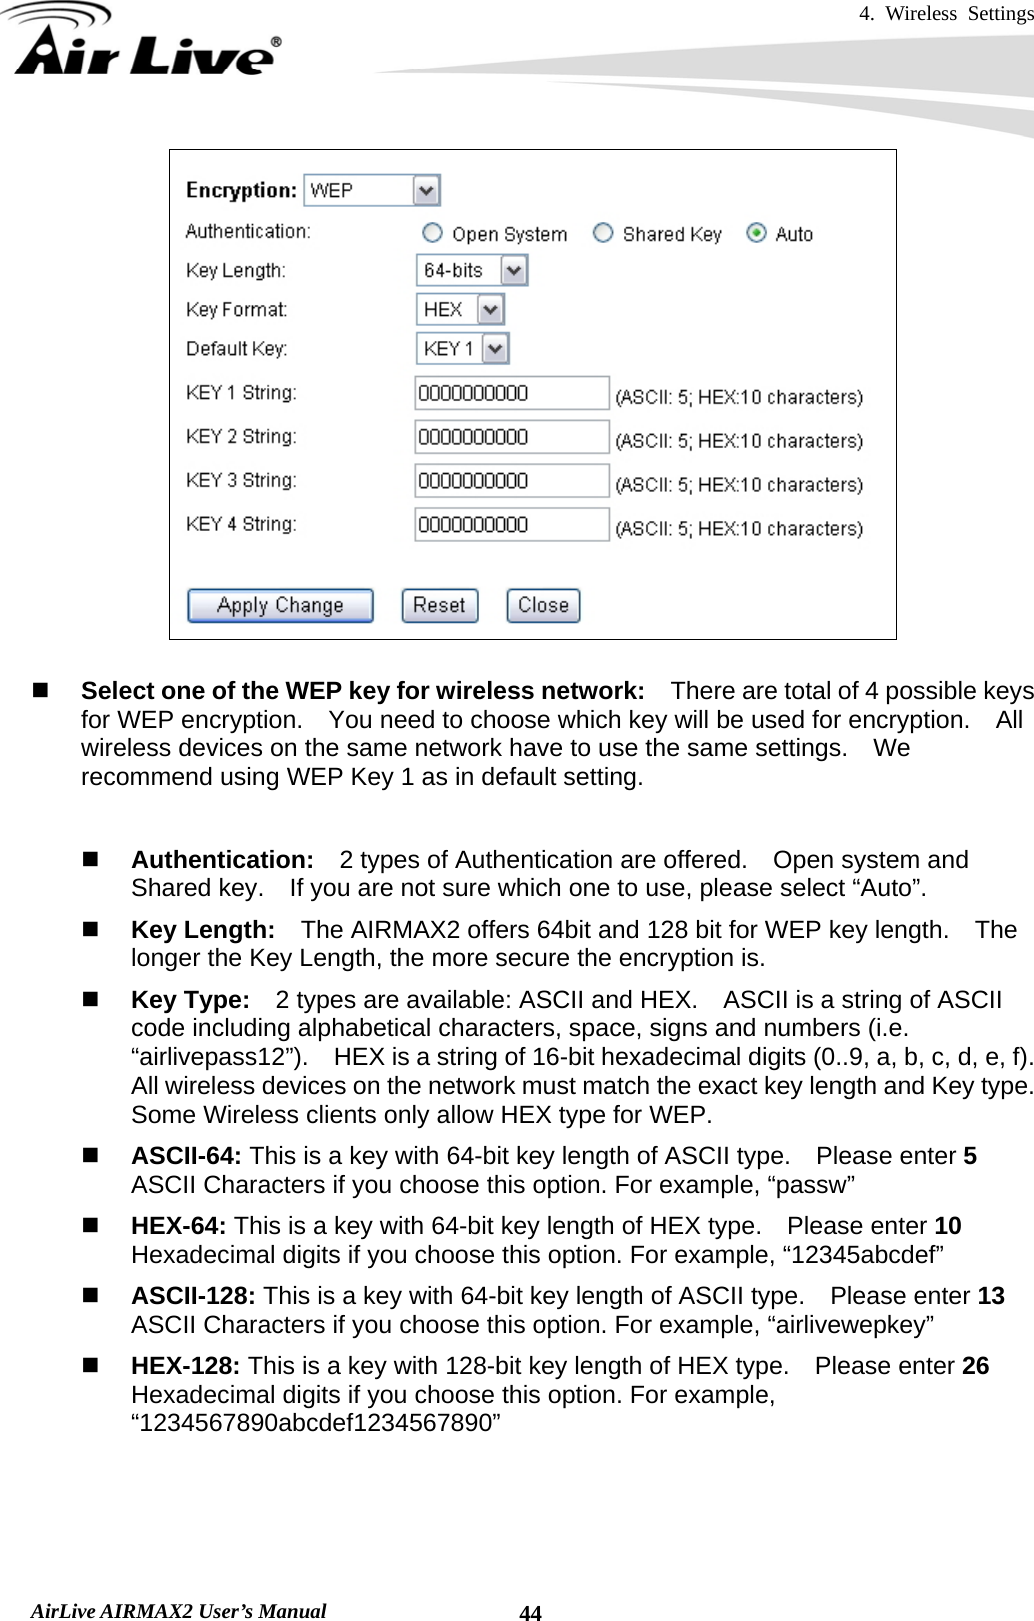 4. Wireless Settings   AirLive AIRMAX2 User’s Manual  44   Select one of the WEP key for wireless network:    There are total of 4 possible keys for WEP encryption.    You need to choose which key will be used for encryption.  All wireless devices on the same network have to use the same settings.    We recommend using WEP Key 1 as in default setting.   Authentication:  2 types of Authentication are offered.    Open system and Shared key.    If you are not sure which one to use, please select “Auto”.  Key Length:    The AIRMAX2 offers 64bit and 128 bit for WEP key length.    The longer the Key Length, the more secure the encryption is.  Key Type:    2 types are available: ASCII and HEX.    ASCII is a string of ASCII code including alphabetical characters, space, signs and numbers (i.e. “airlivepass12”).    HEX is a string of 16-bit hexadecimal digits (0..9, a, b, c, d, e, f).   All wireless devices on the network must match the exact key length and Key type.   Some Wireless clients only allow HEX type for WEP.  ASCII-64: This is a key with 64-bit key length of ASCII type.    Please enter 5 ASCII Characters if you choose this option. For example, “passw”  HEX-64: This is a key with 64-bit key length of HEX type.    Please enter 10 Hexadecimal digits if you choose this option. For example, “12345abcdef”  ASCII-128: This is a key with 64-bit key length of ASCII type.    Please enter 13 ASCII Characters if you choose this option. For example, “airlivewepkey”  HEX-128: This is a key with 128-bit key length of HEX type.    Please enter 26 Hexadecimal digits if you choose this option. For example, “1234567890abcdef1234567890”   